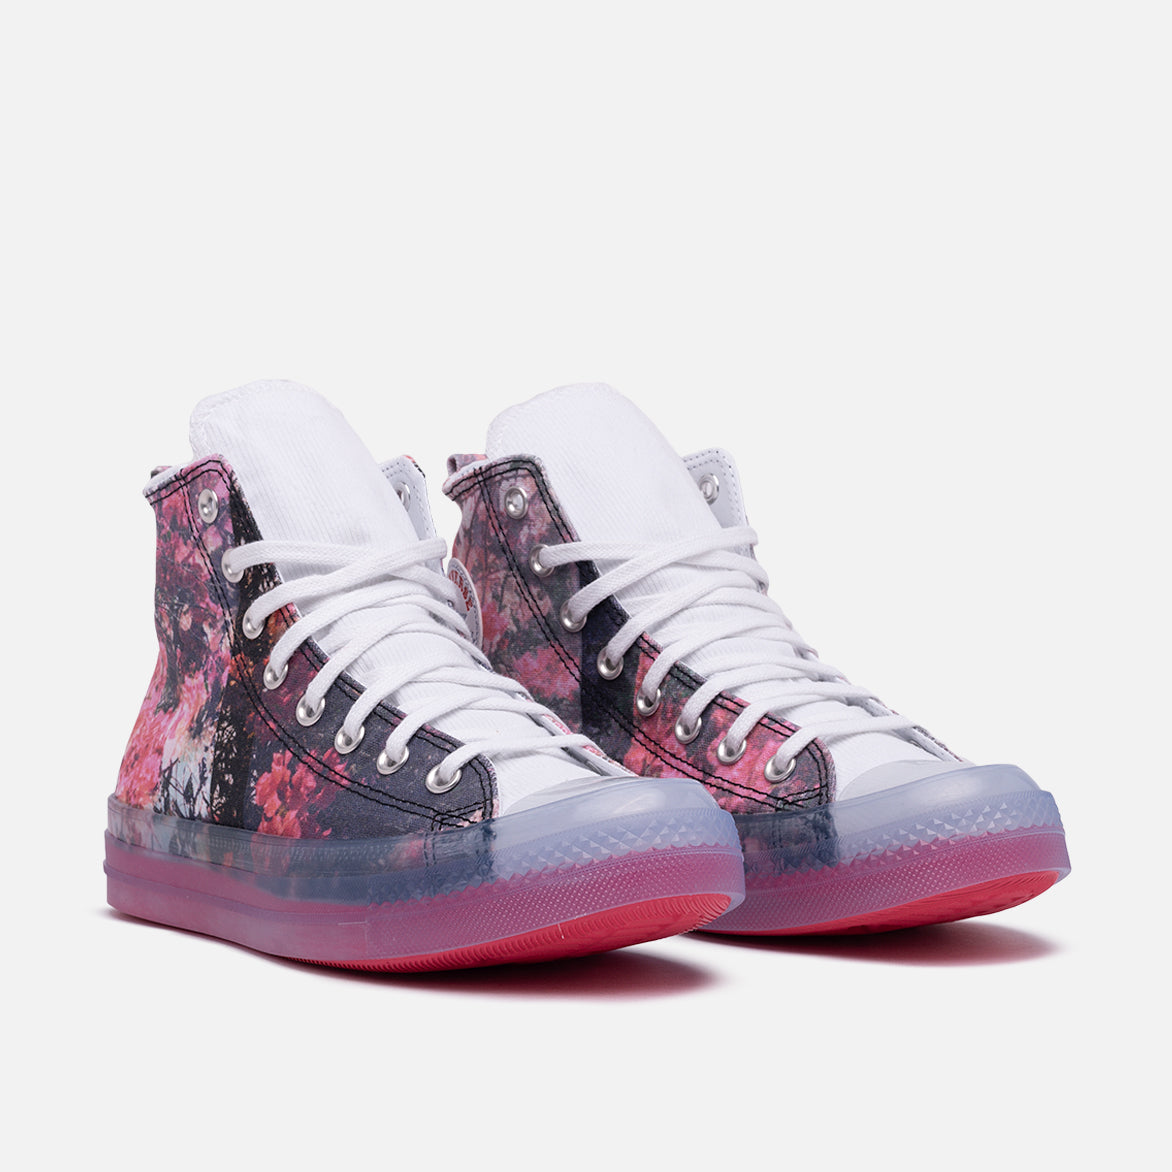 SHANIQWA JARVIS X CONVERSE CHUCK TAYLOR CX - TEABERRY / WHITE / BLACK